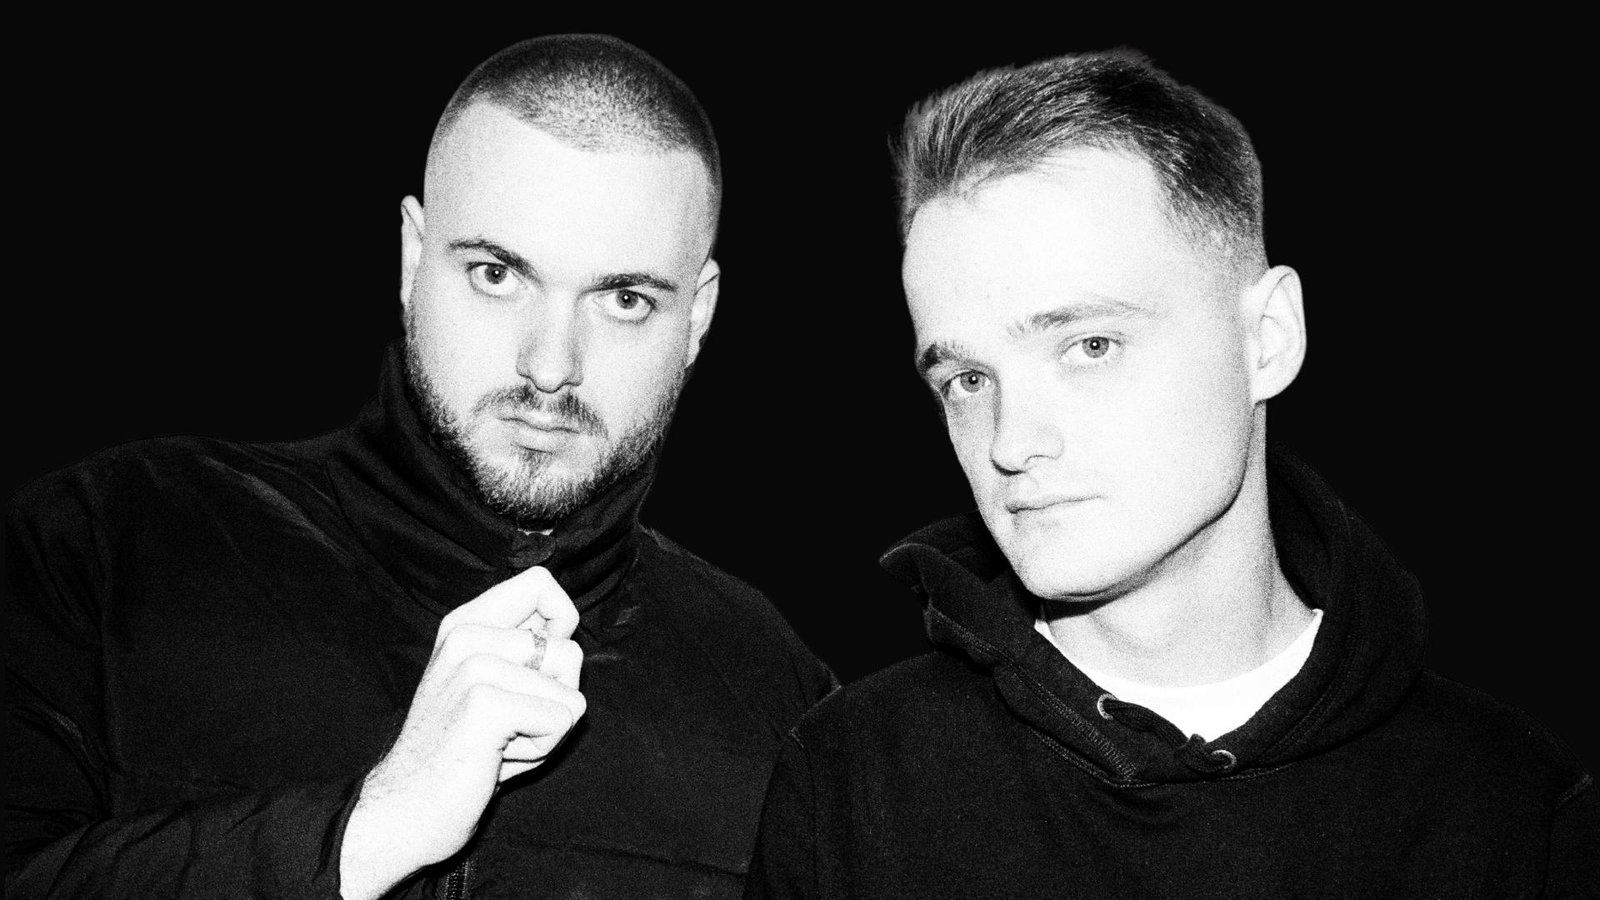 Duke & Jones Return to Their House Music Roots with Exciting New Single, "Don't Tell Me"